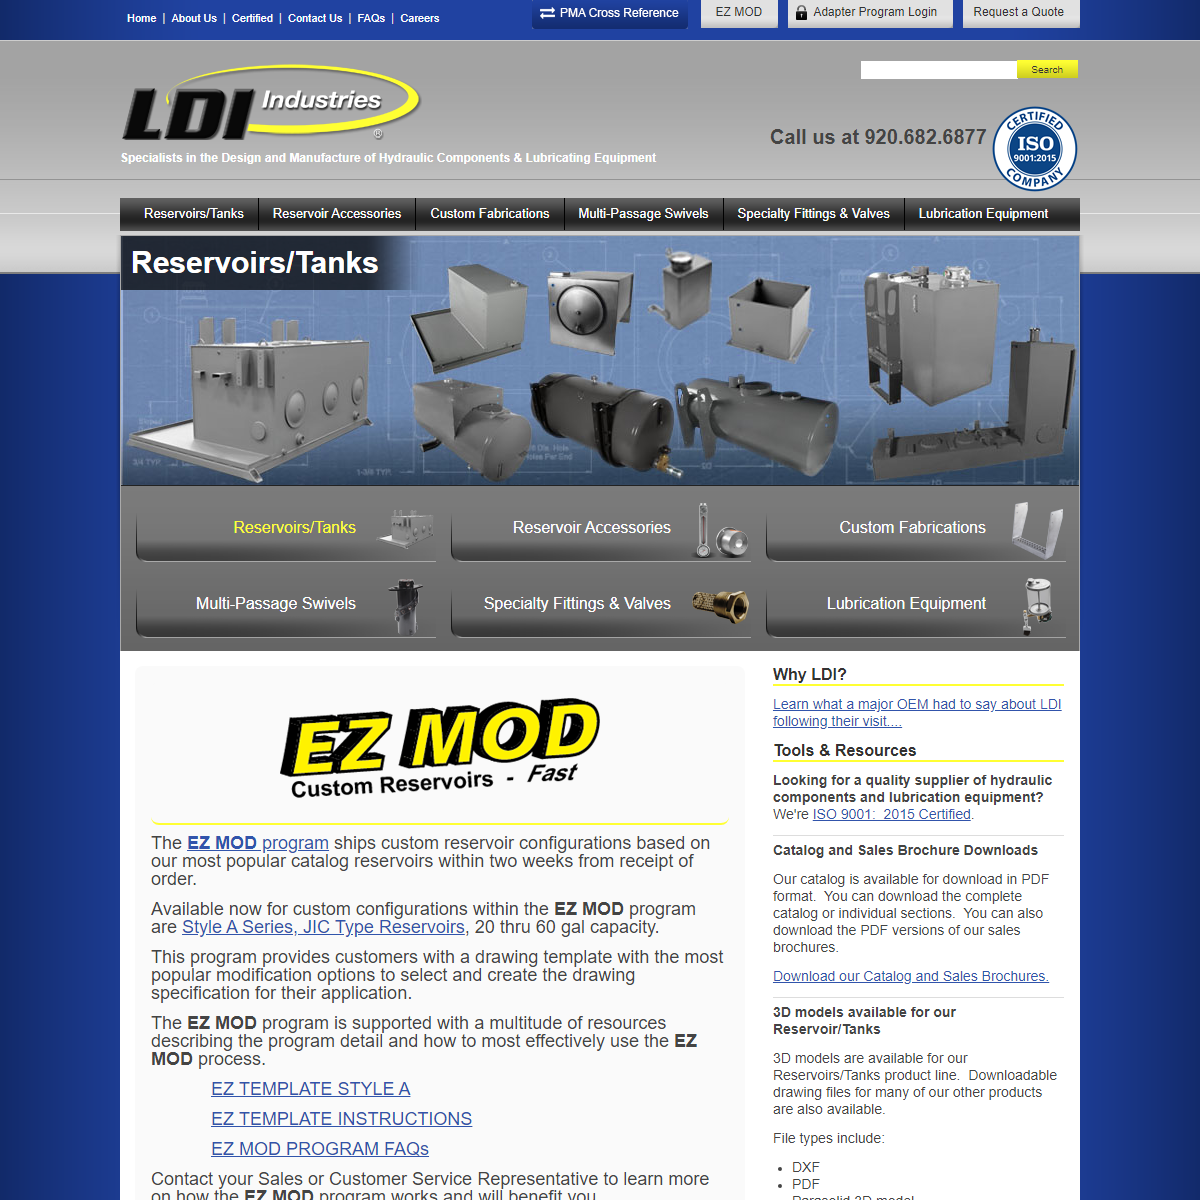 A complete backup of http://www.ldi-industries.com/LDI.htm